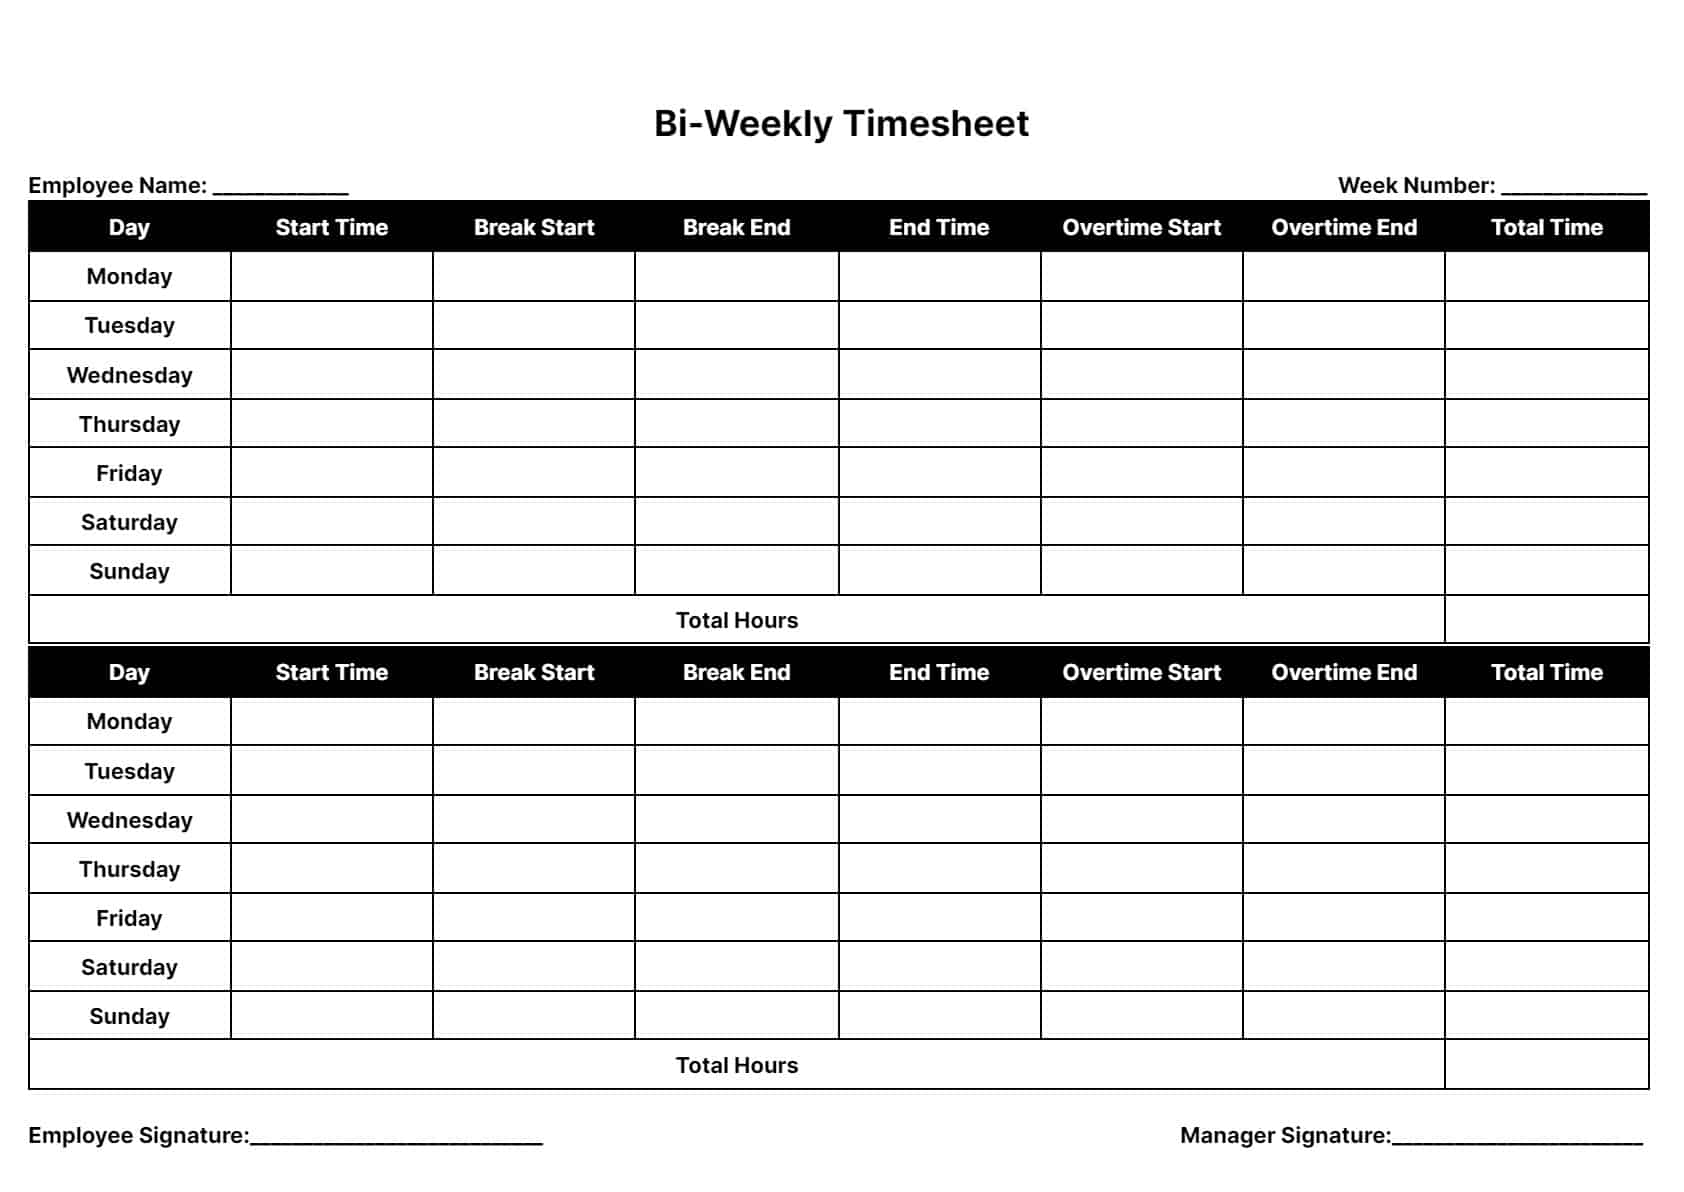 Timesheet Templates: Download Print for Free